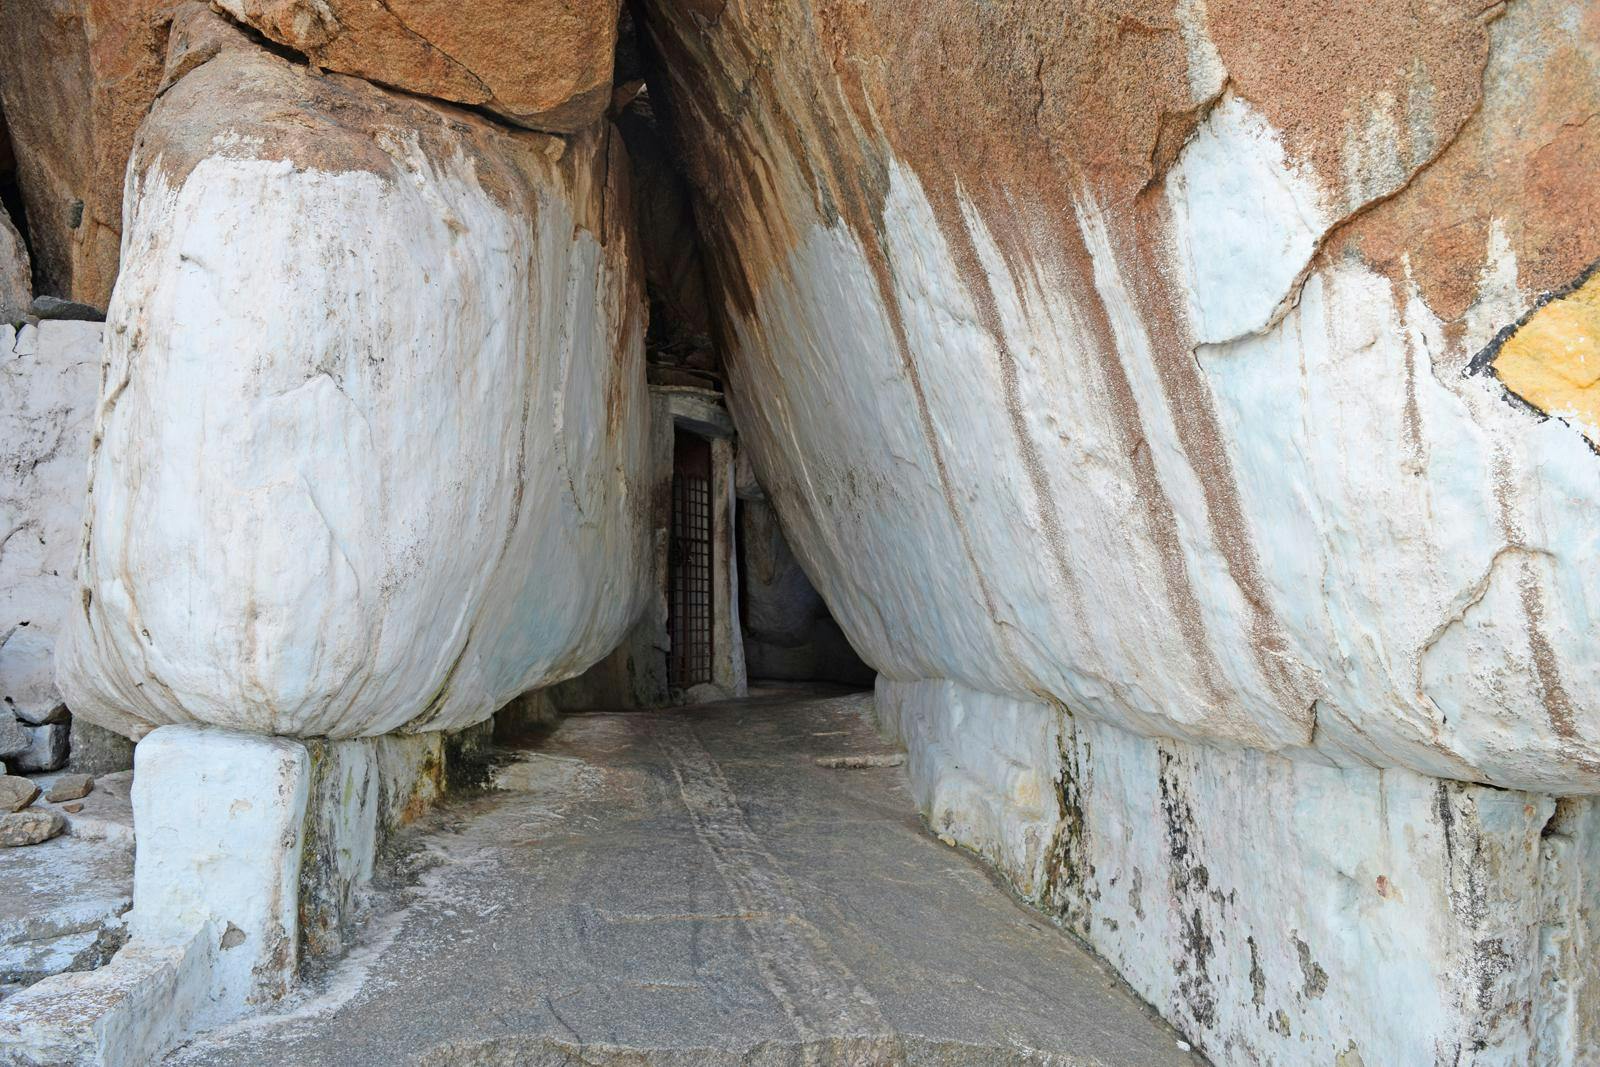 Entrance to Sugriva Cave